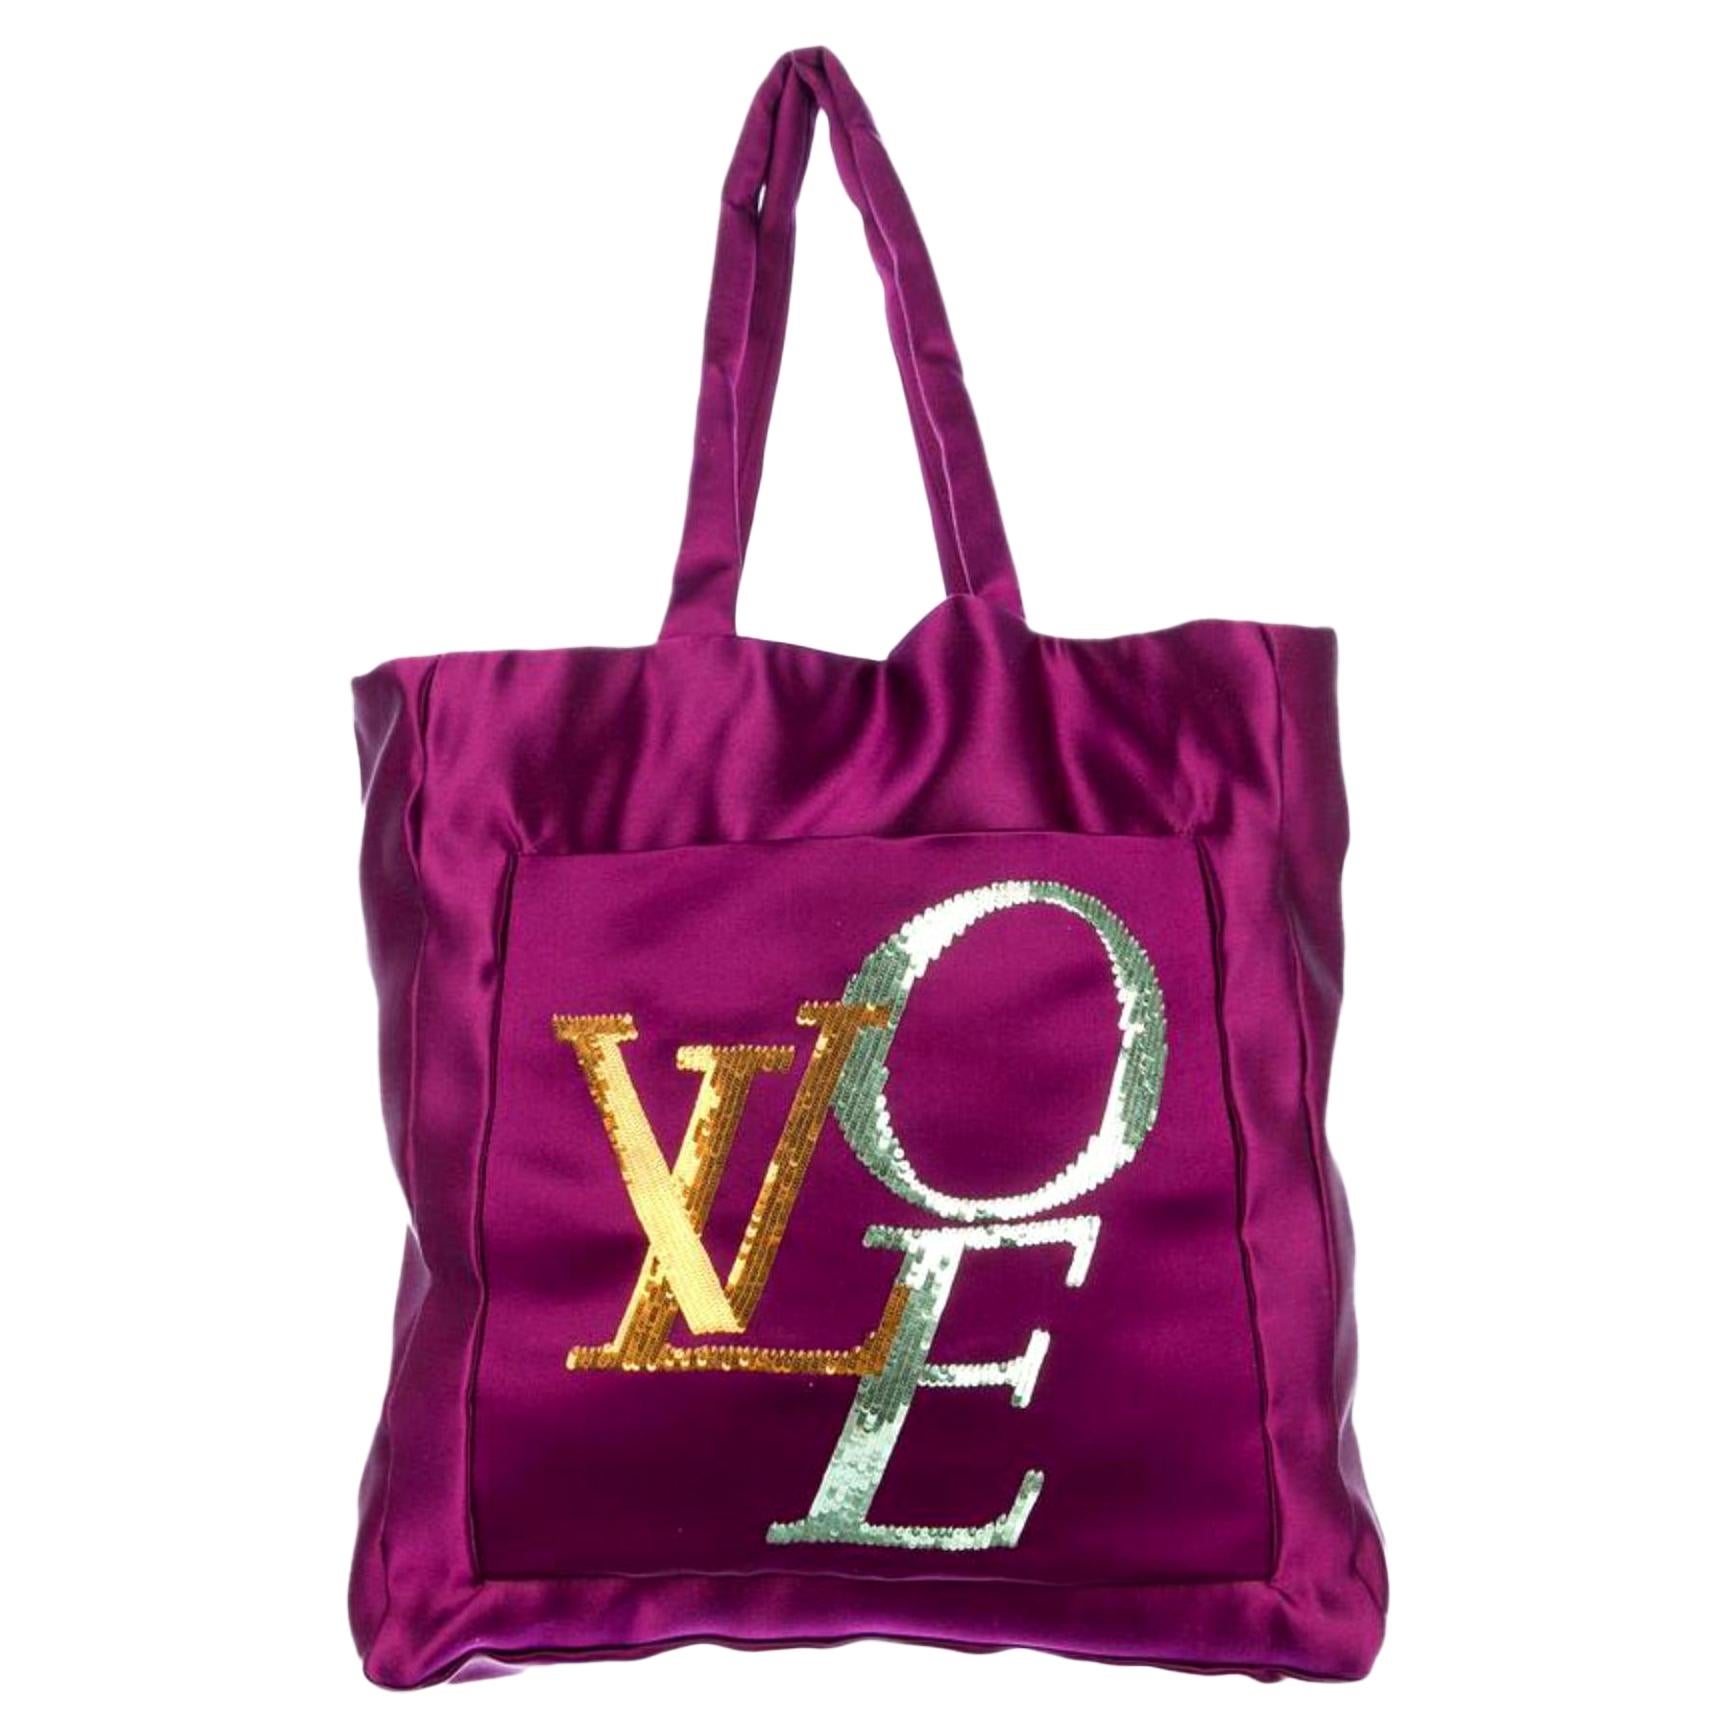 Louis Vuitton Limited Edition That's Love Large Tote 225138 Satin Shoulder Bag For Sale